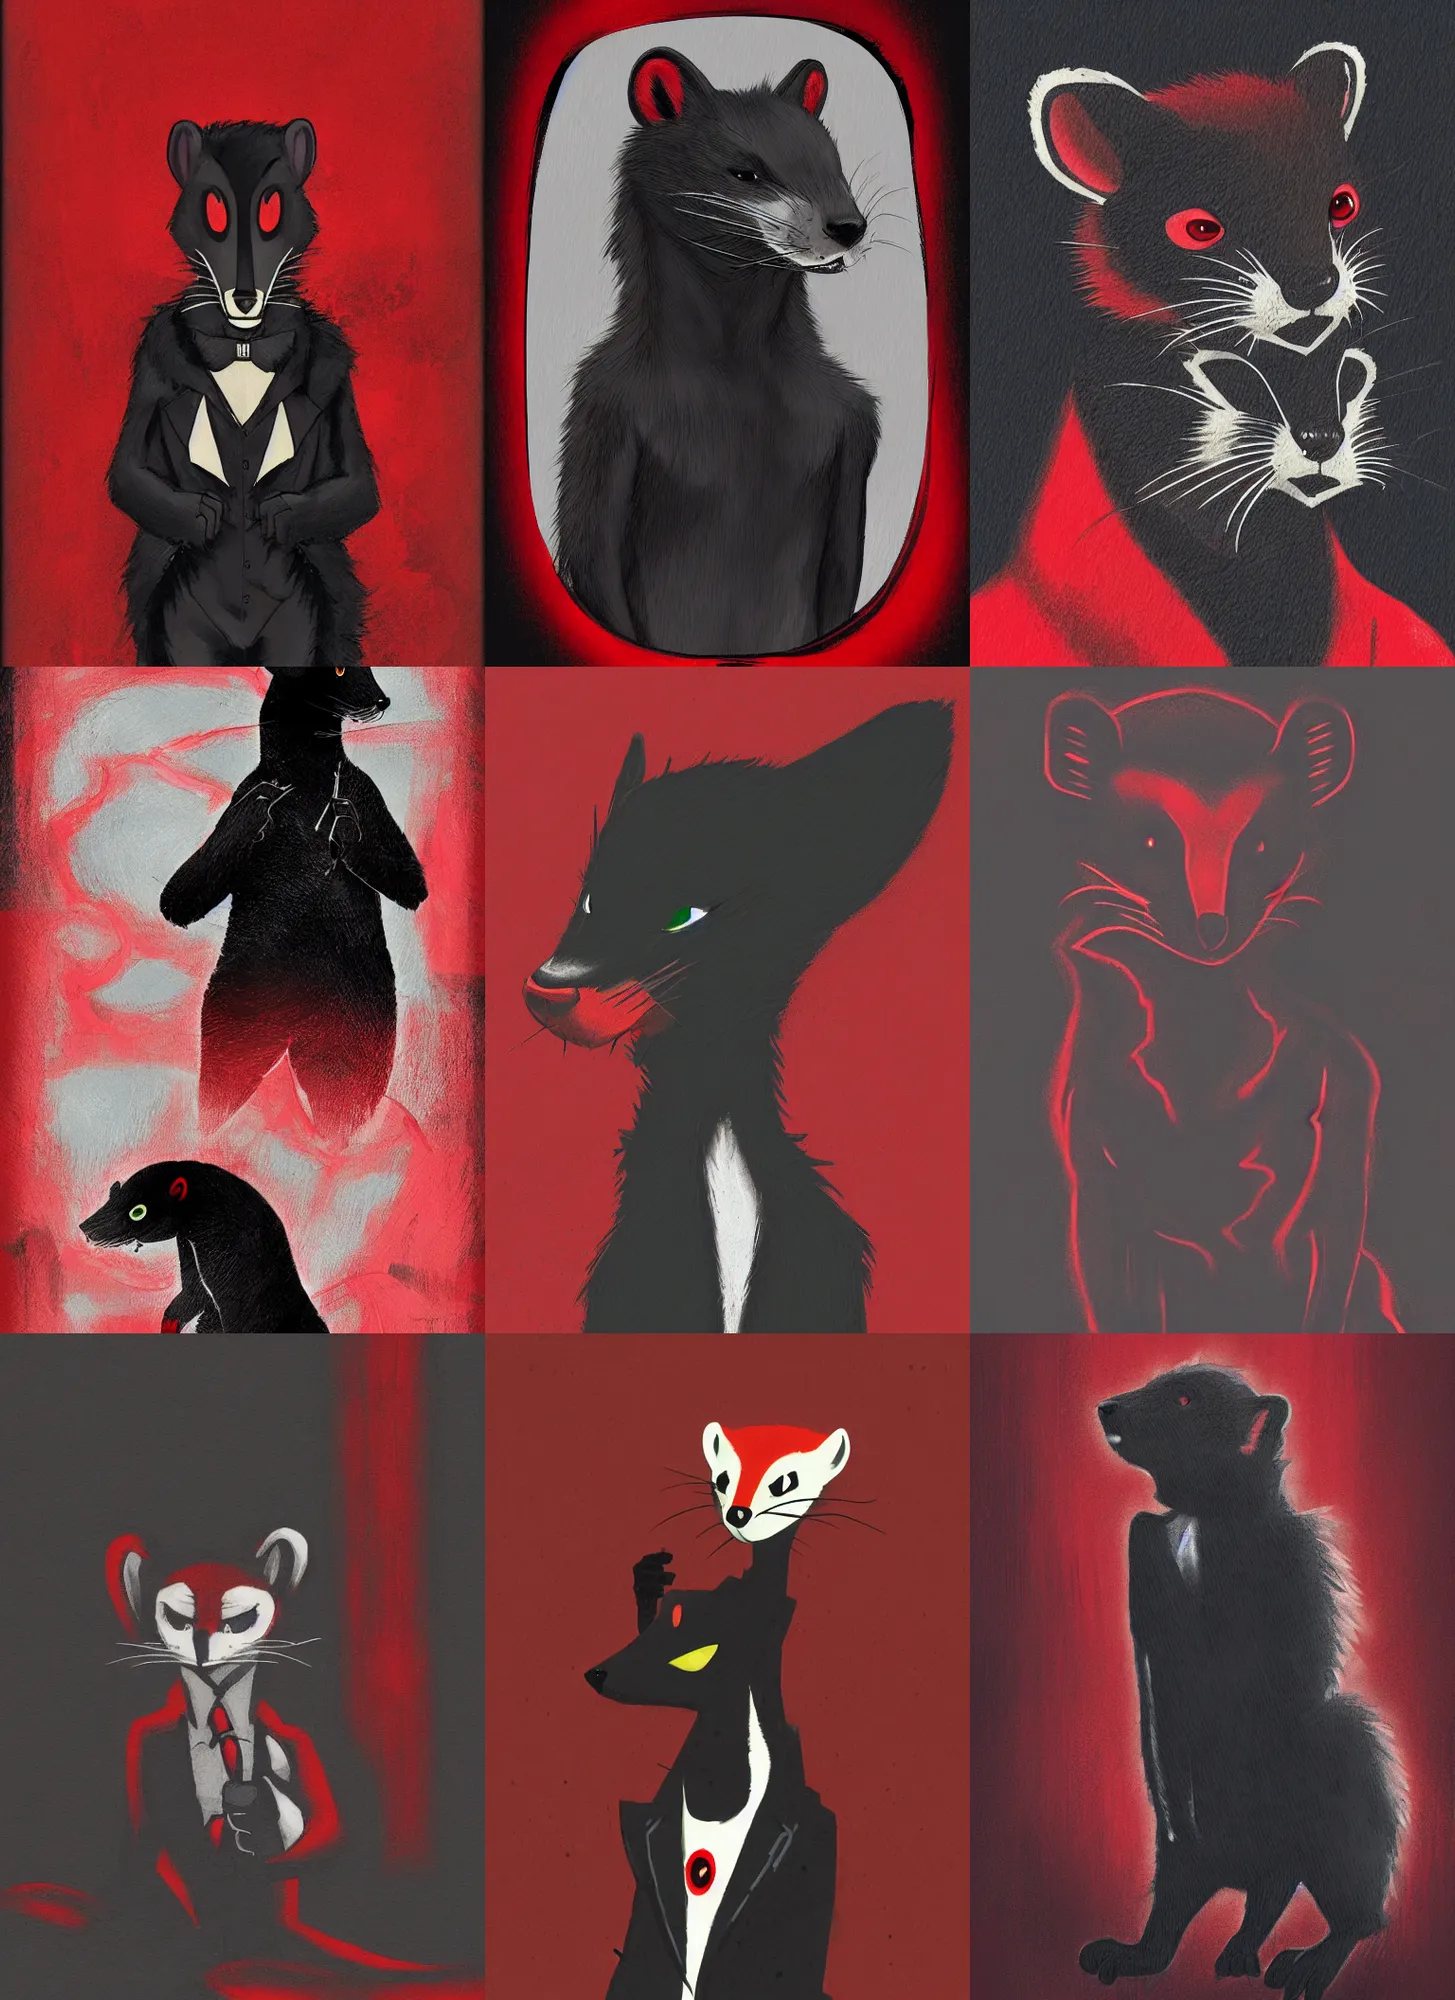 Prompt: red - and - black weasel / stoat fursona ( furry fandom ), neo - noir setting, detective fiction cover art style done in broad brush strokes